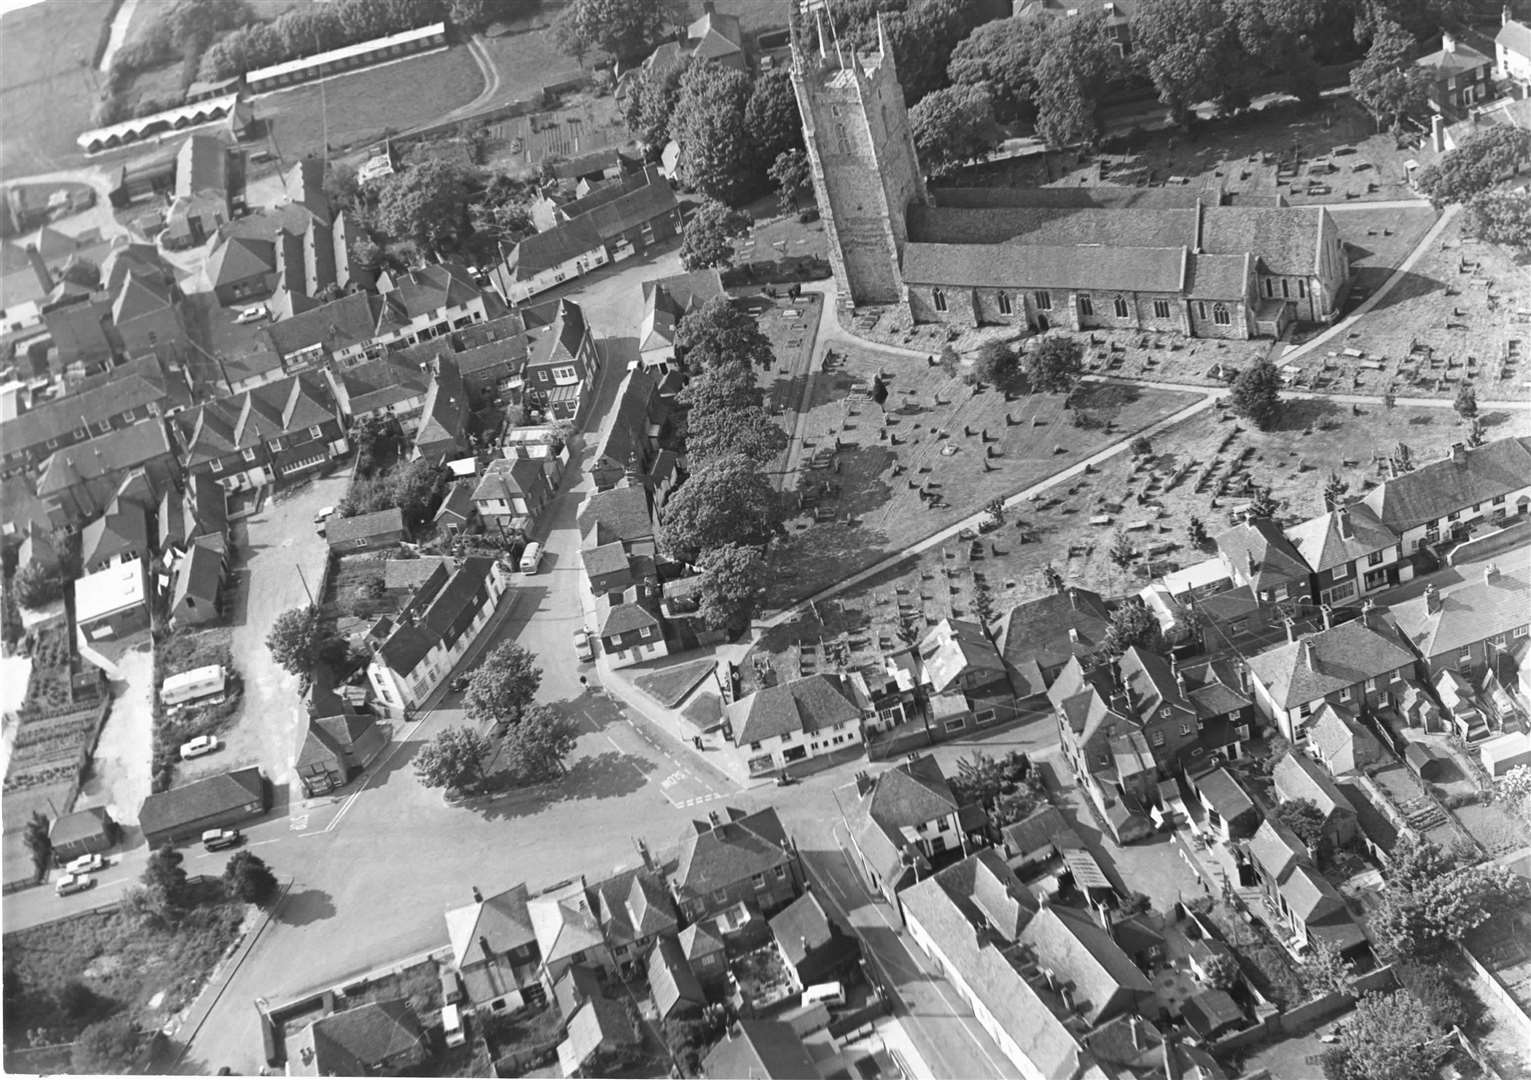 The centre of Lydd in June 1968